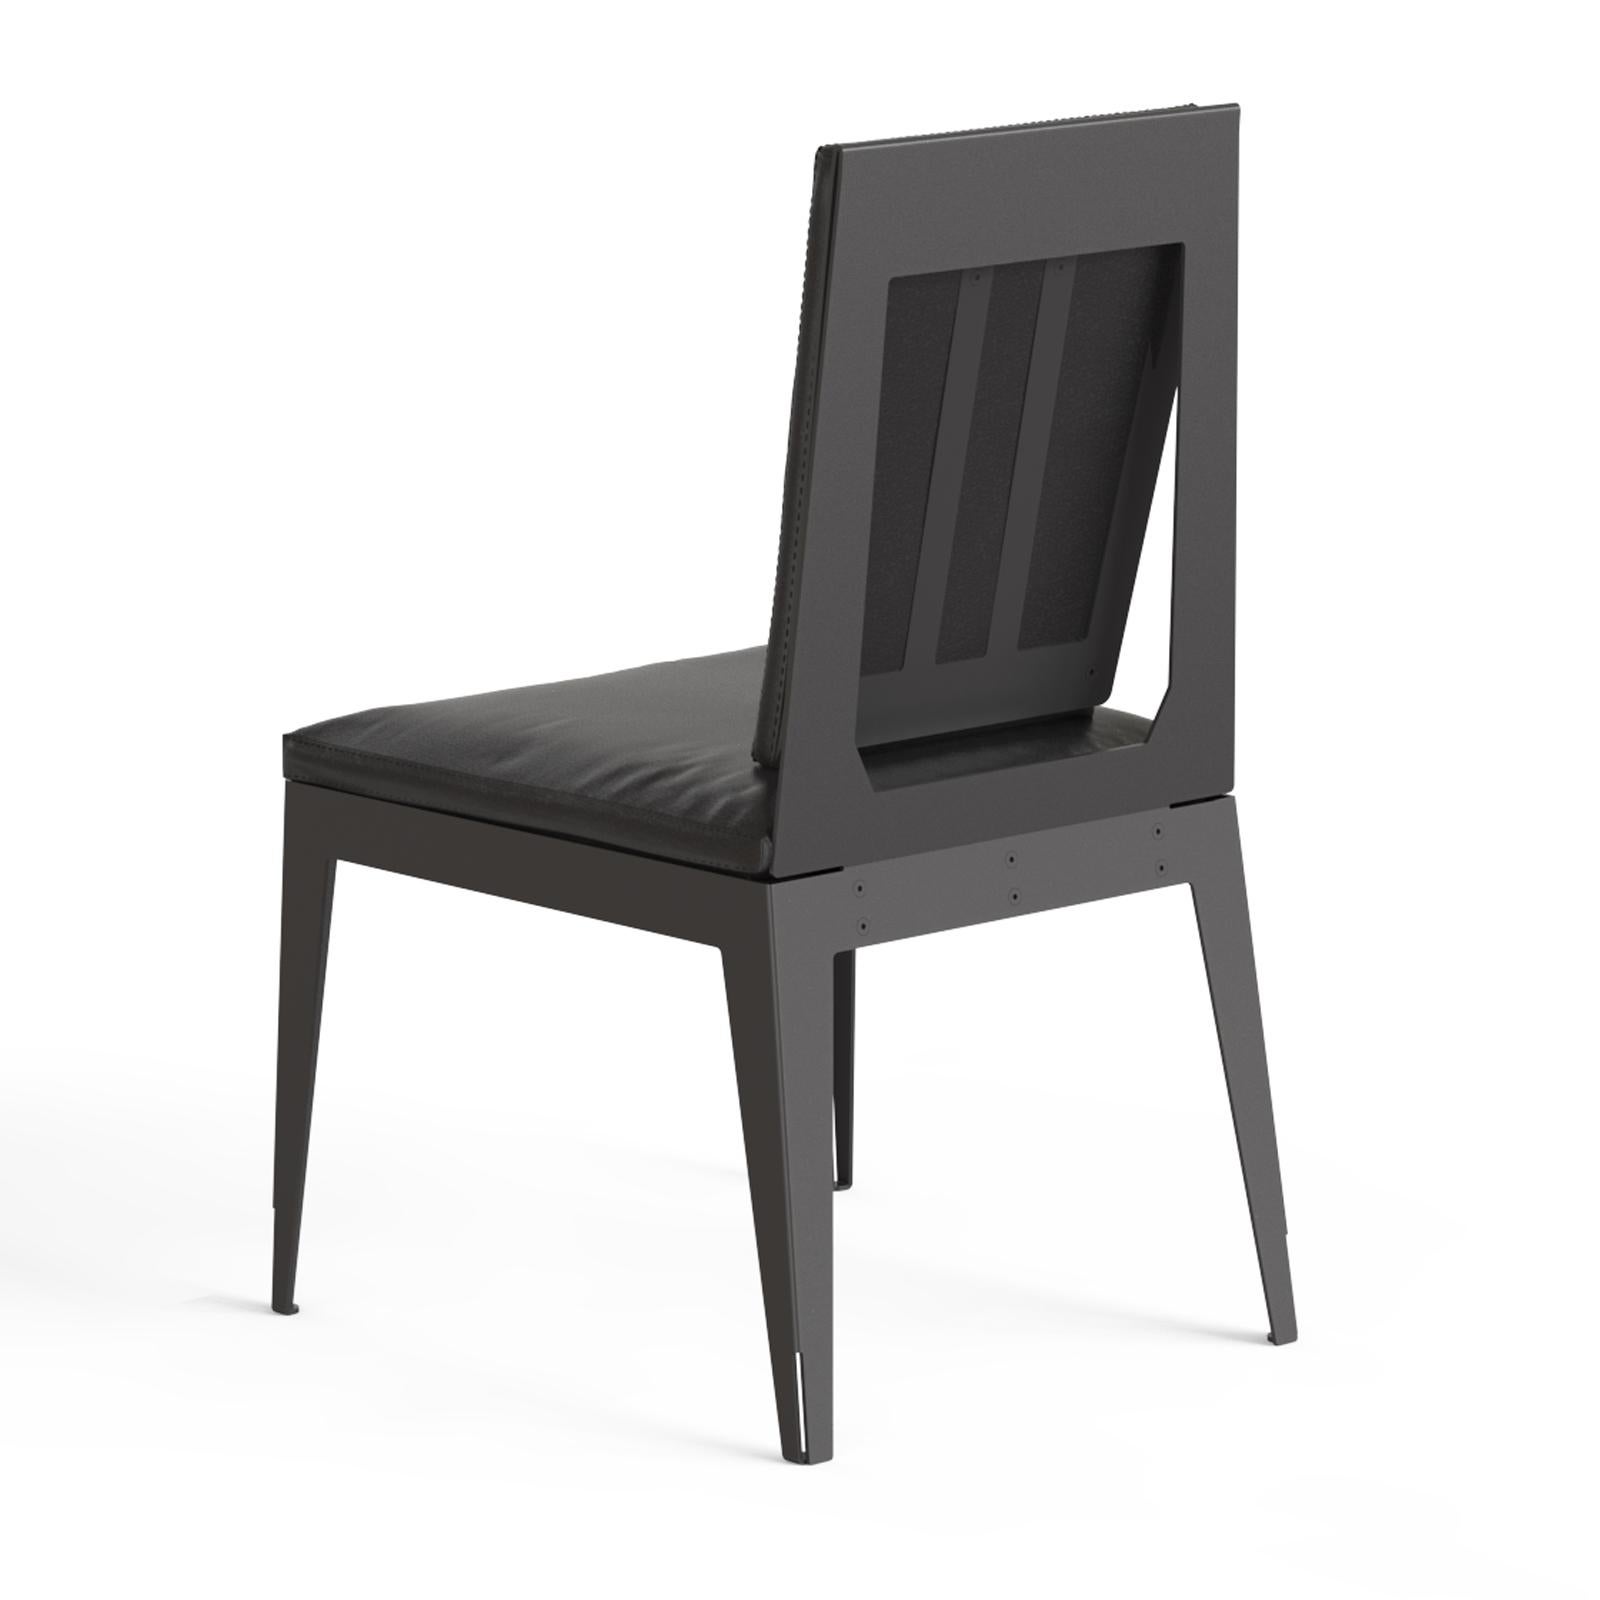 Dining chair, satin black or white metal structure (aluminum) with black leather upholstery.

The 